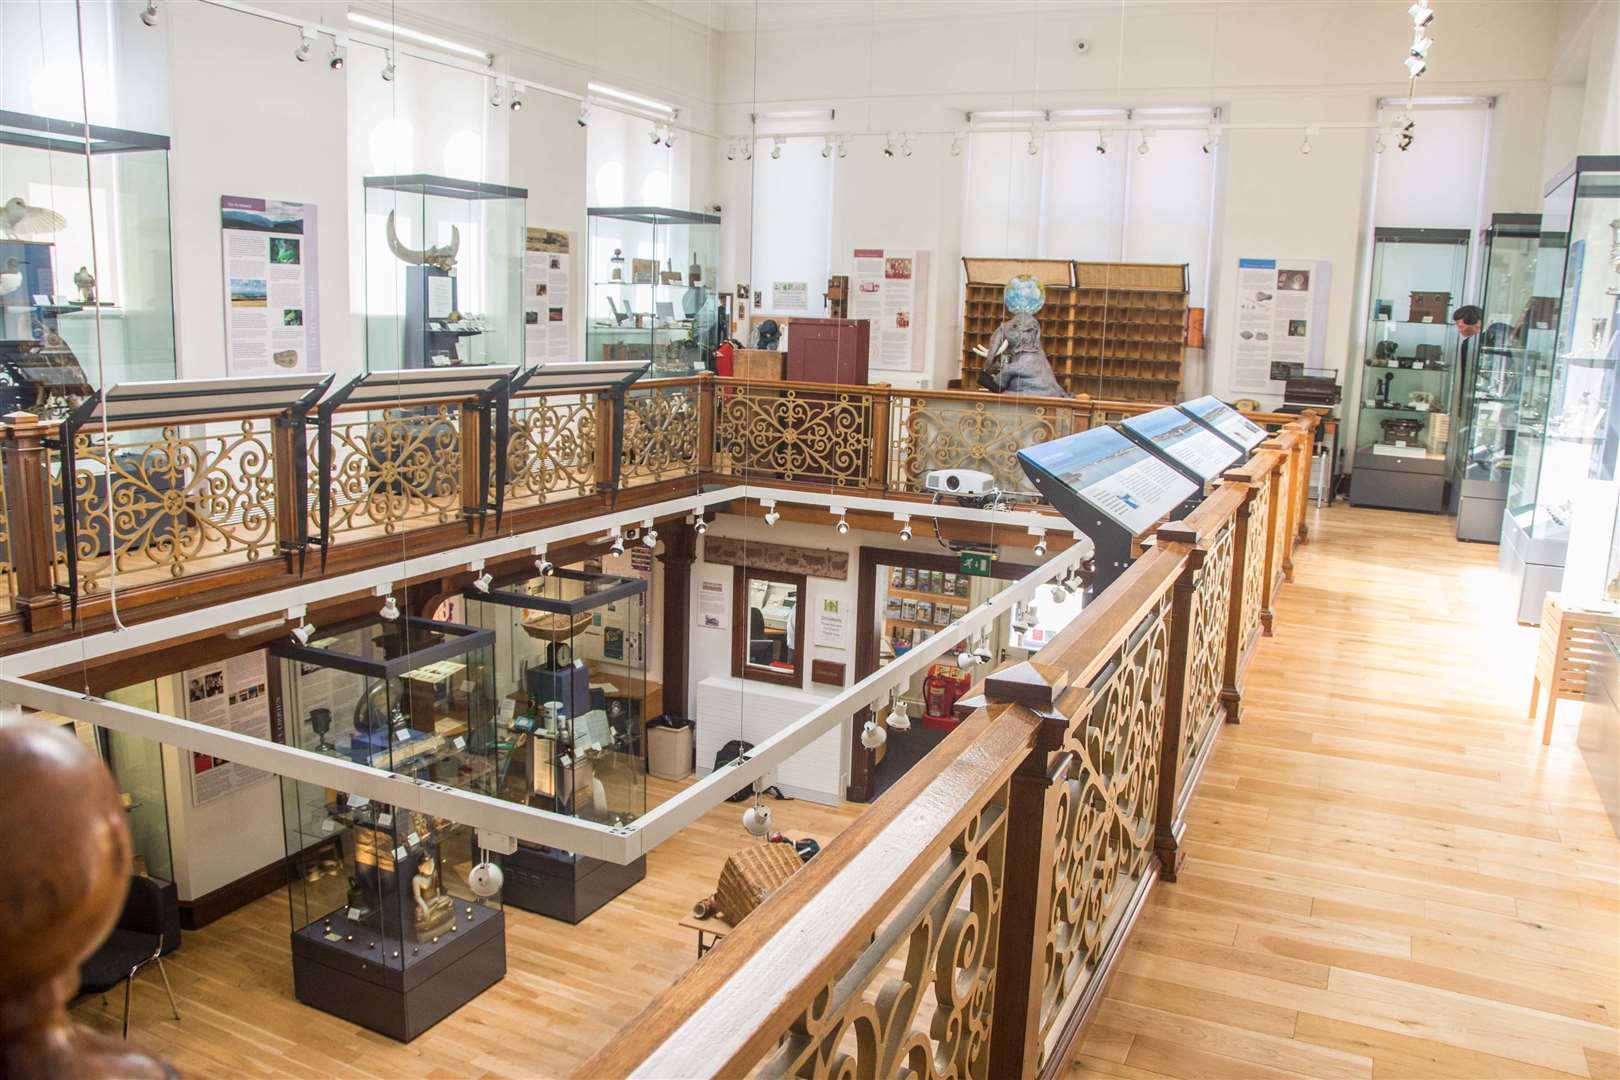 Exhibitions upstairs at the Falconer Museum, summer 2019.